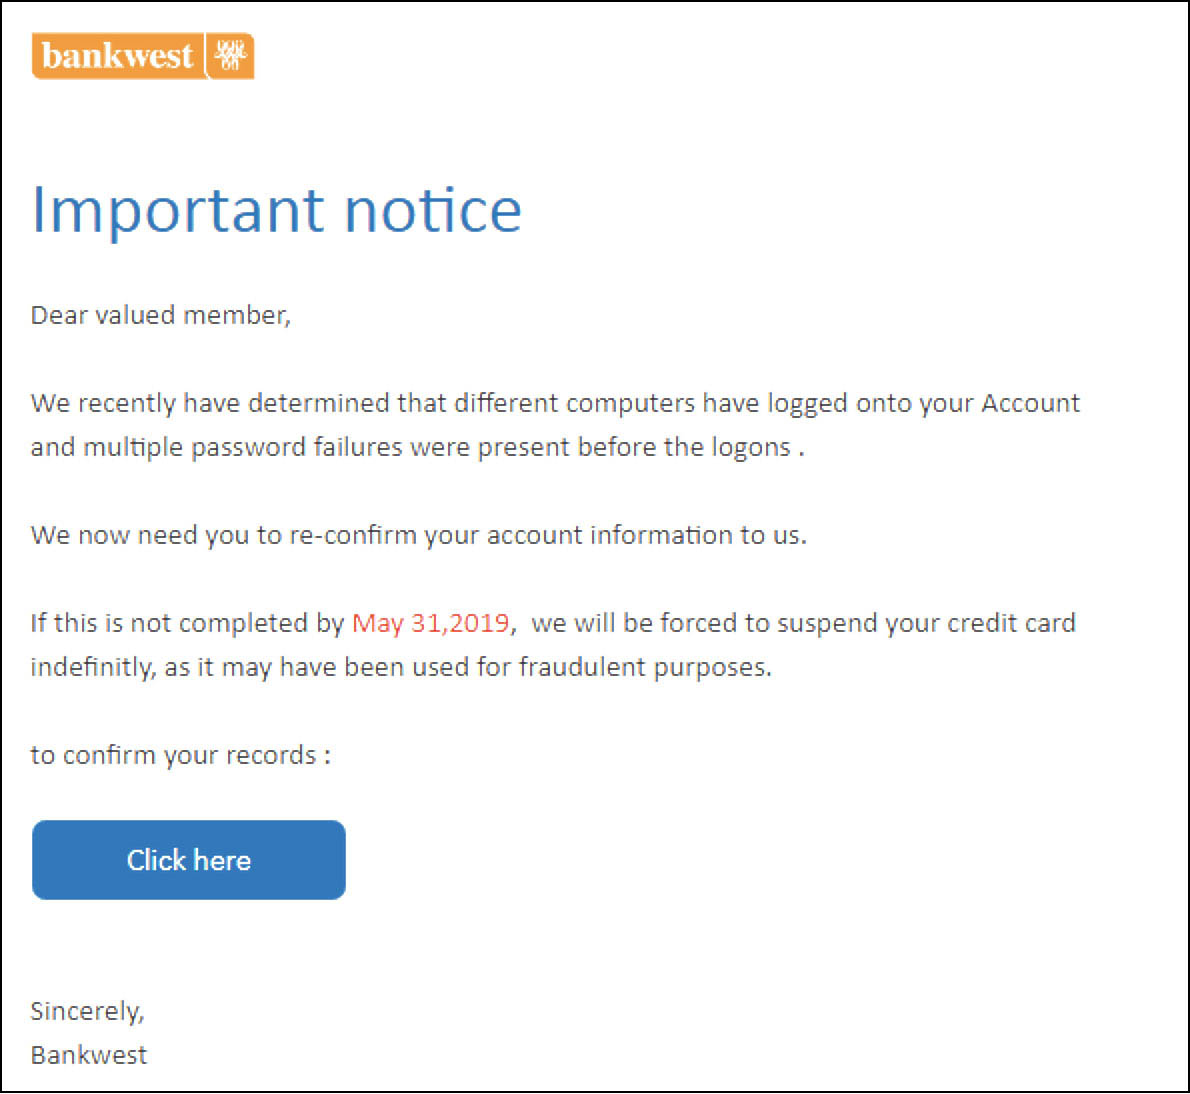 Image example of a fake Bankwest email asking you to confirm your account information